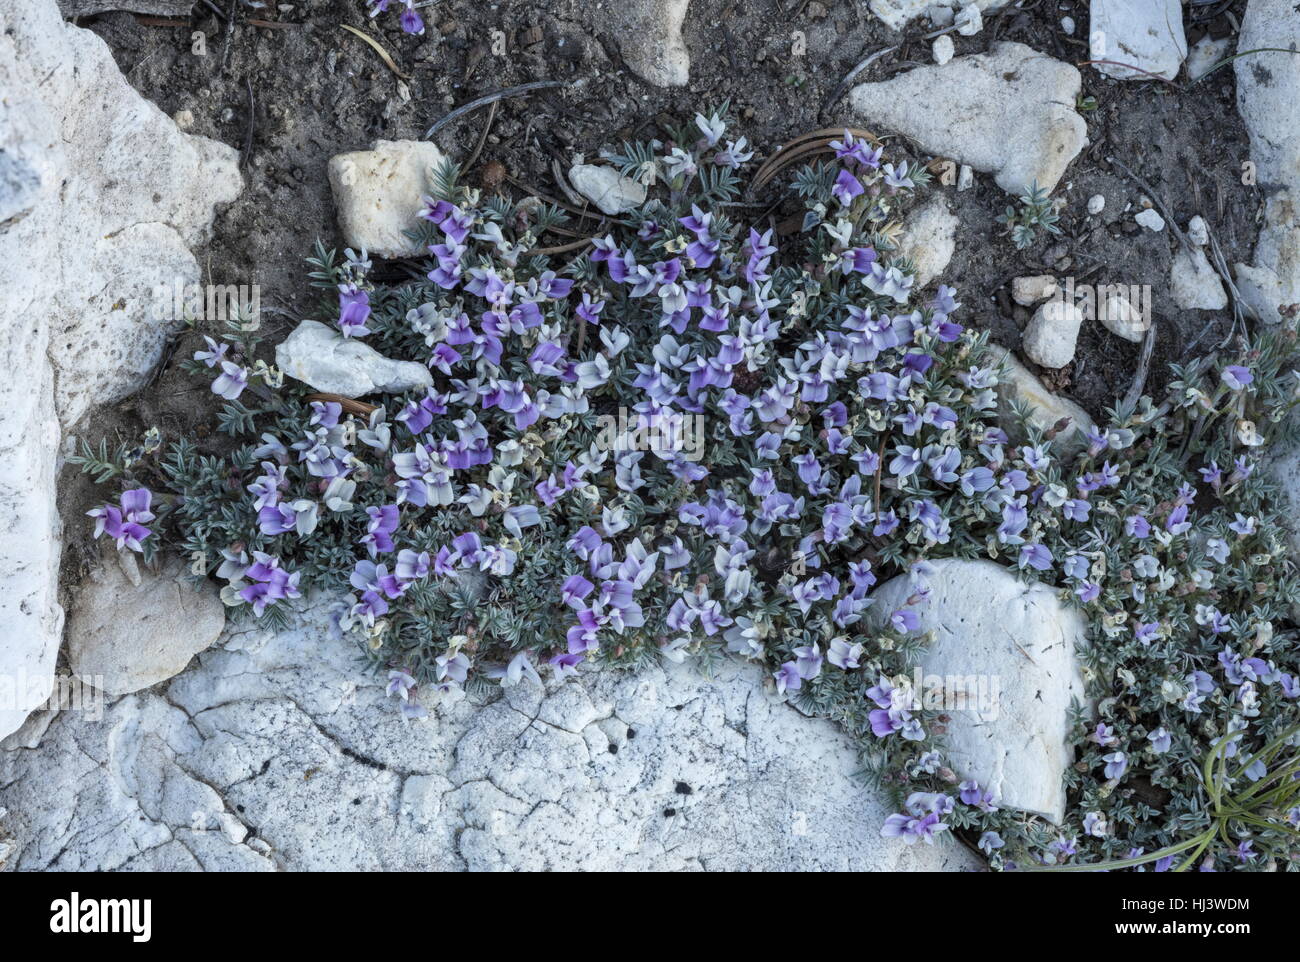 Spiny milkvetch, Astragalus kentrophyta clump in full flower at high altitude in the White Mountains, California. Stock Photo